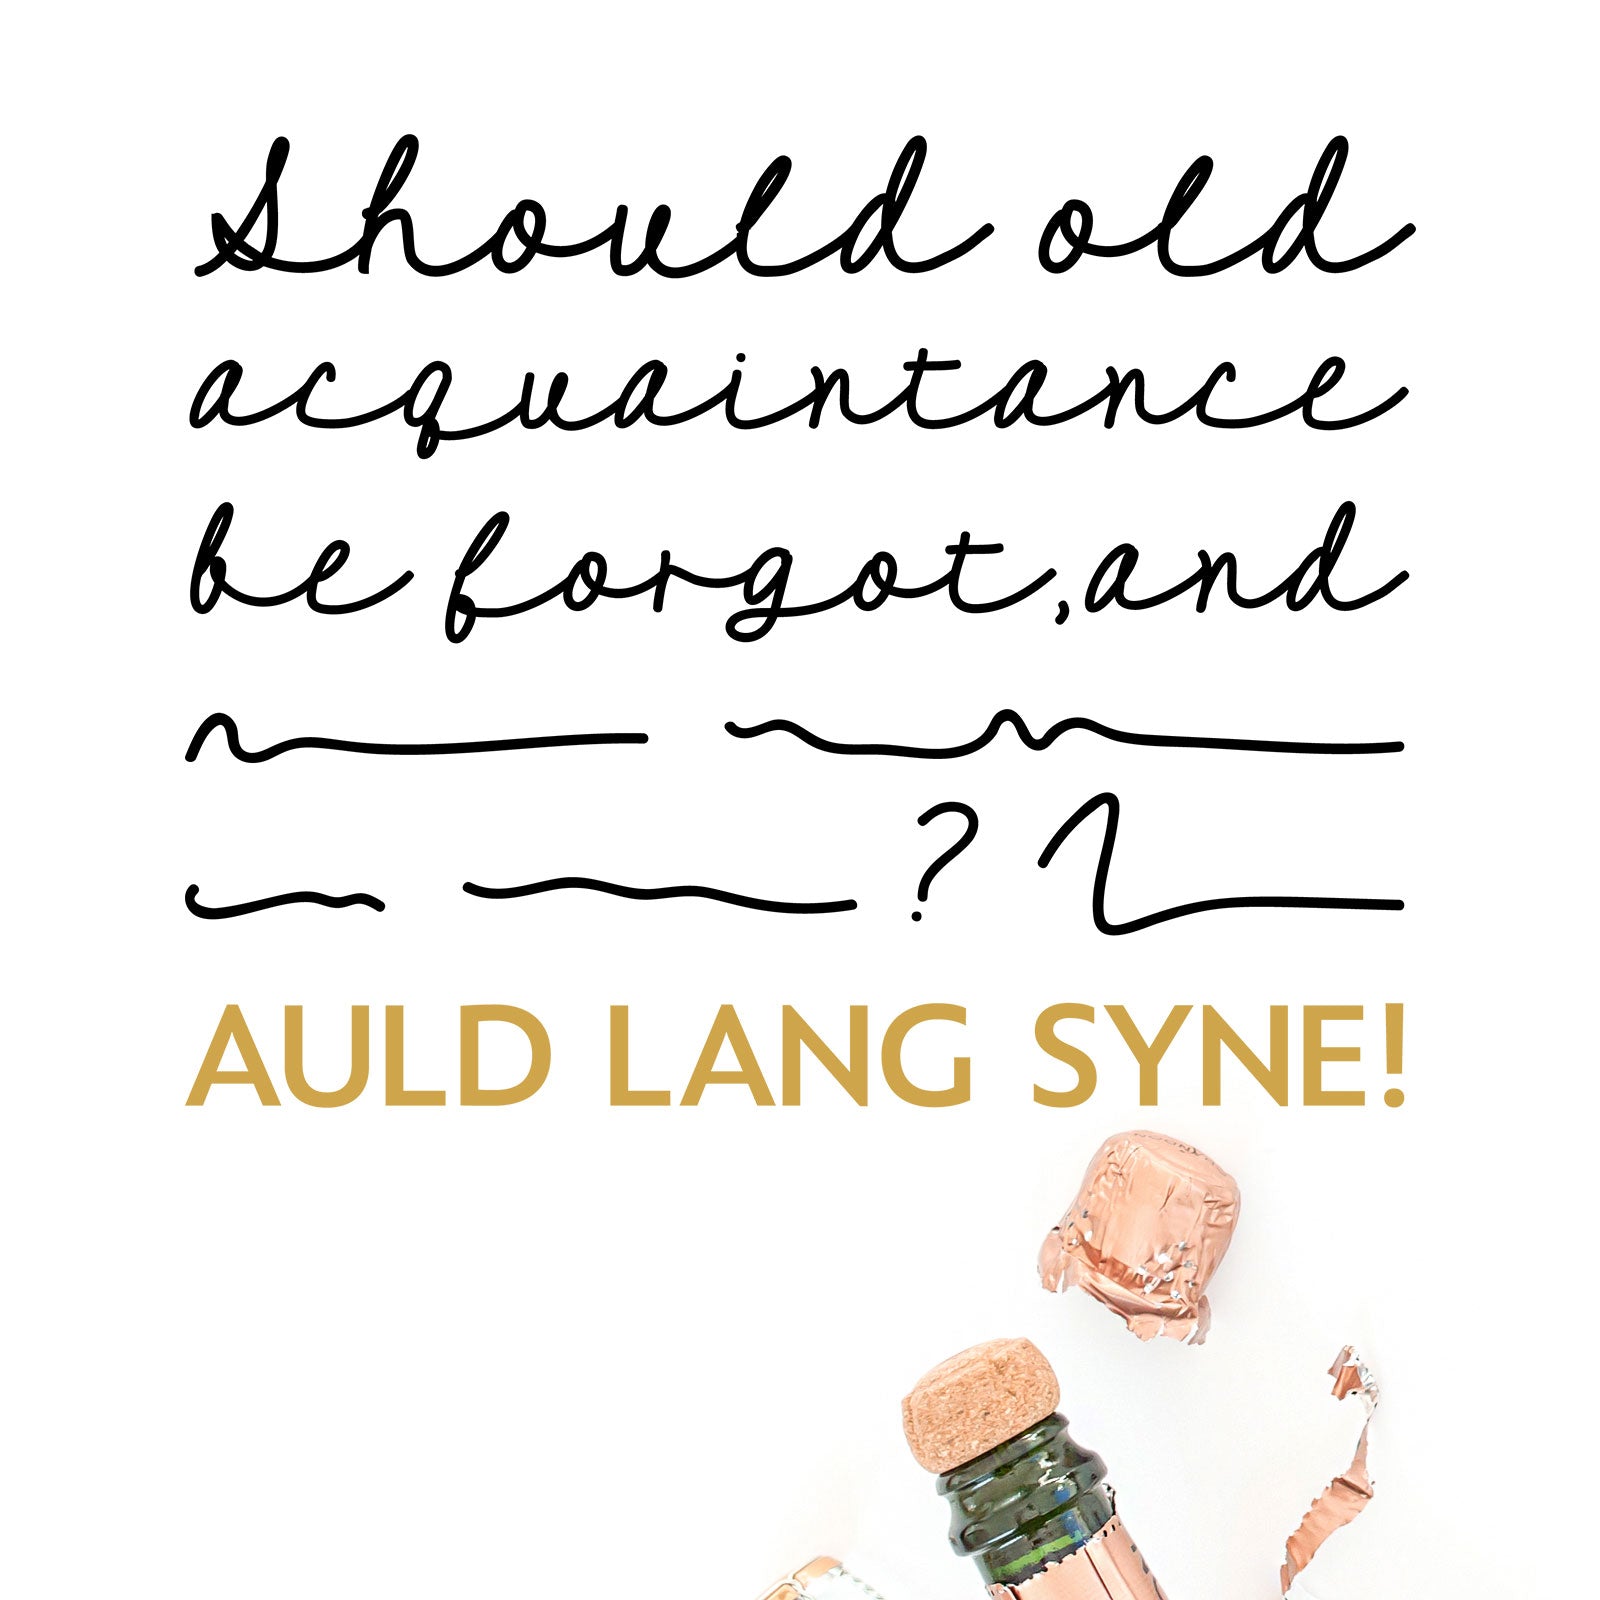 Freebie Friday SVG - Auld Lang Syne svg with what we're really all singing cause who ever remembers the words?